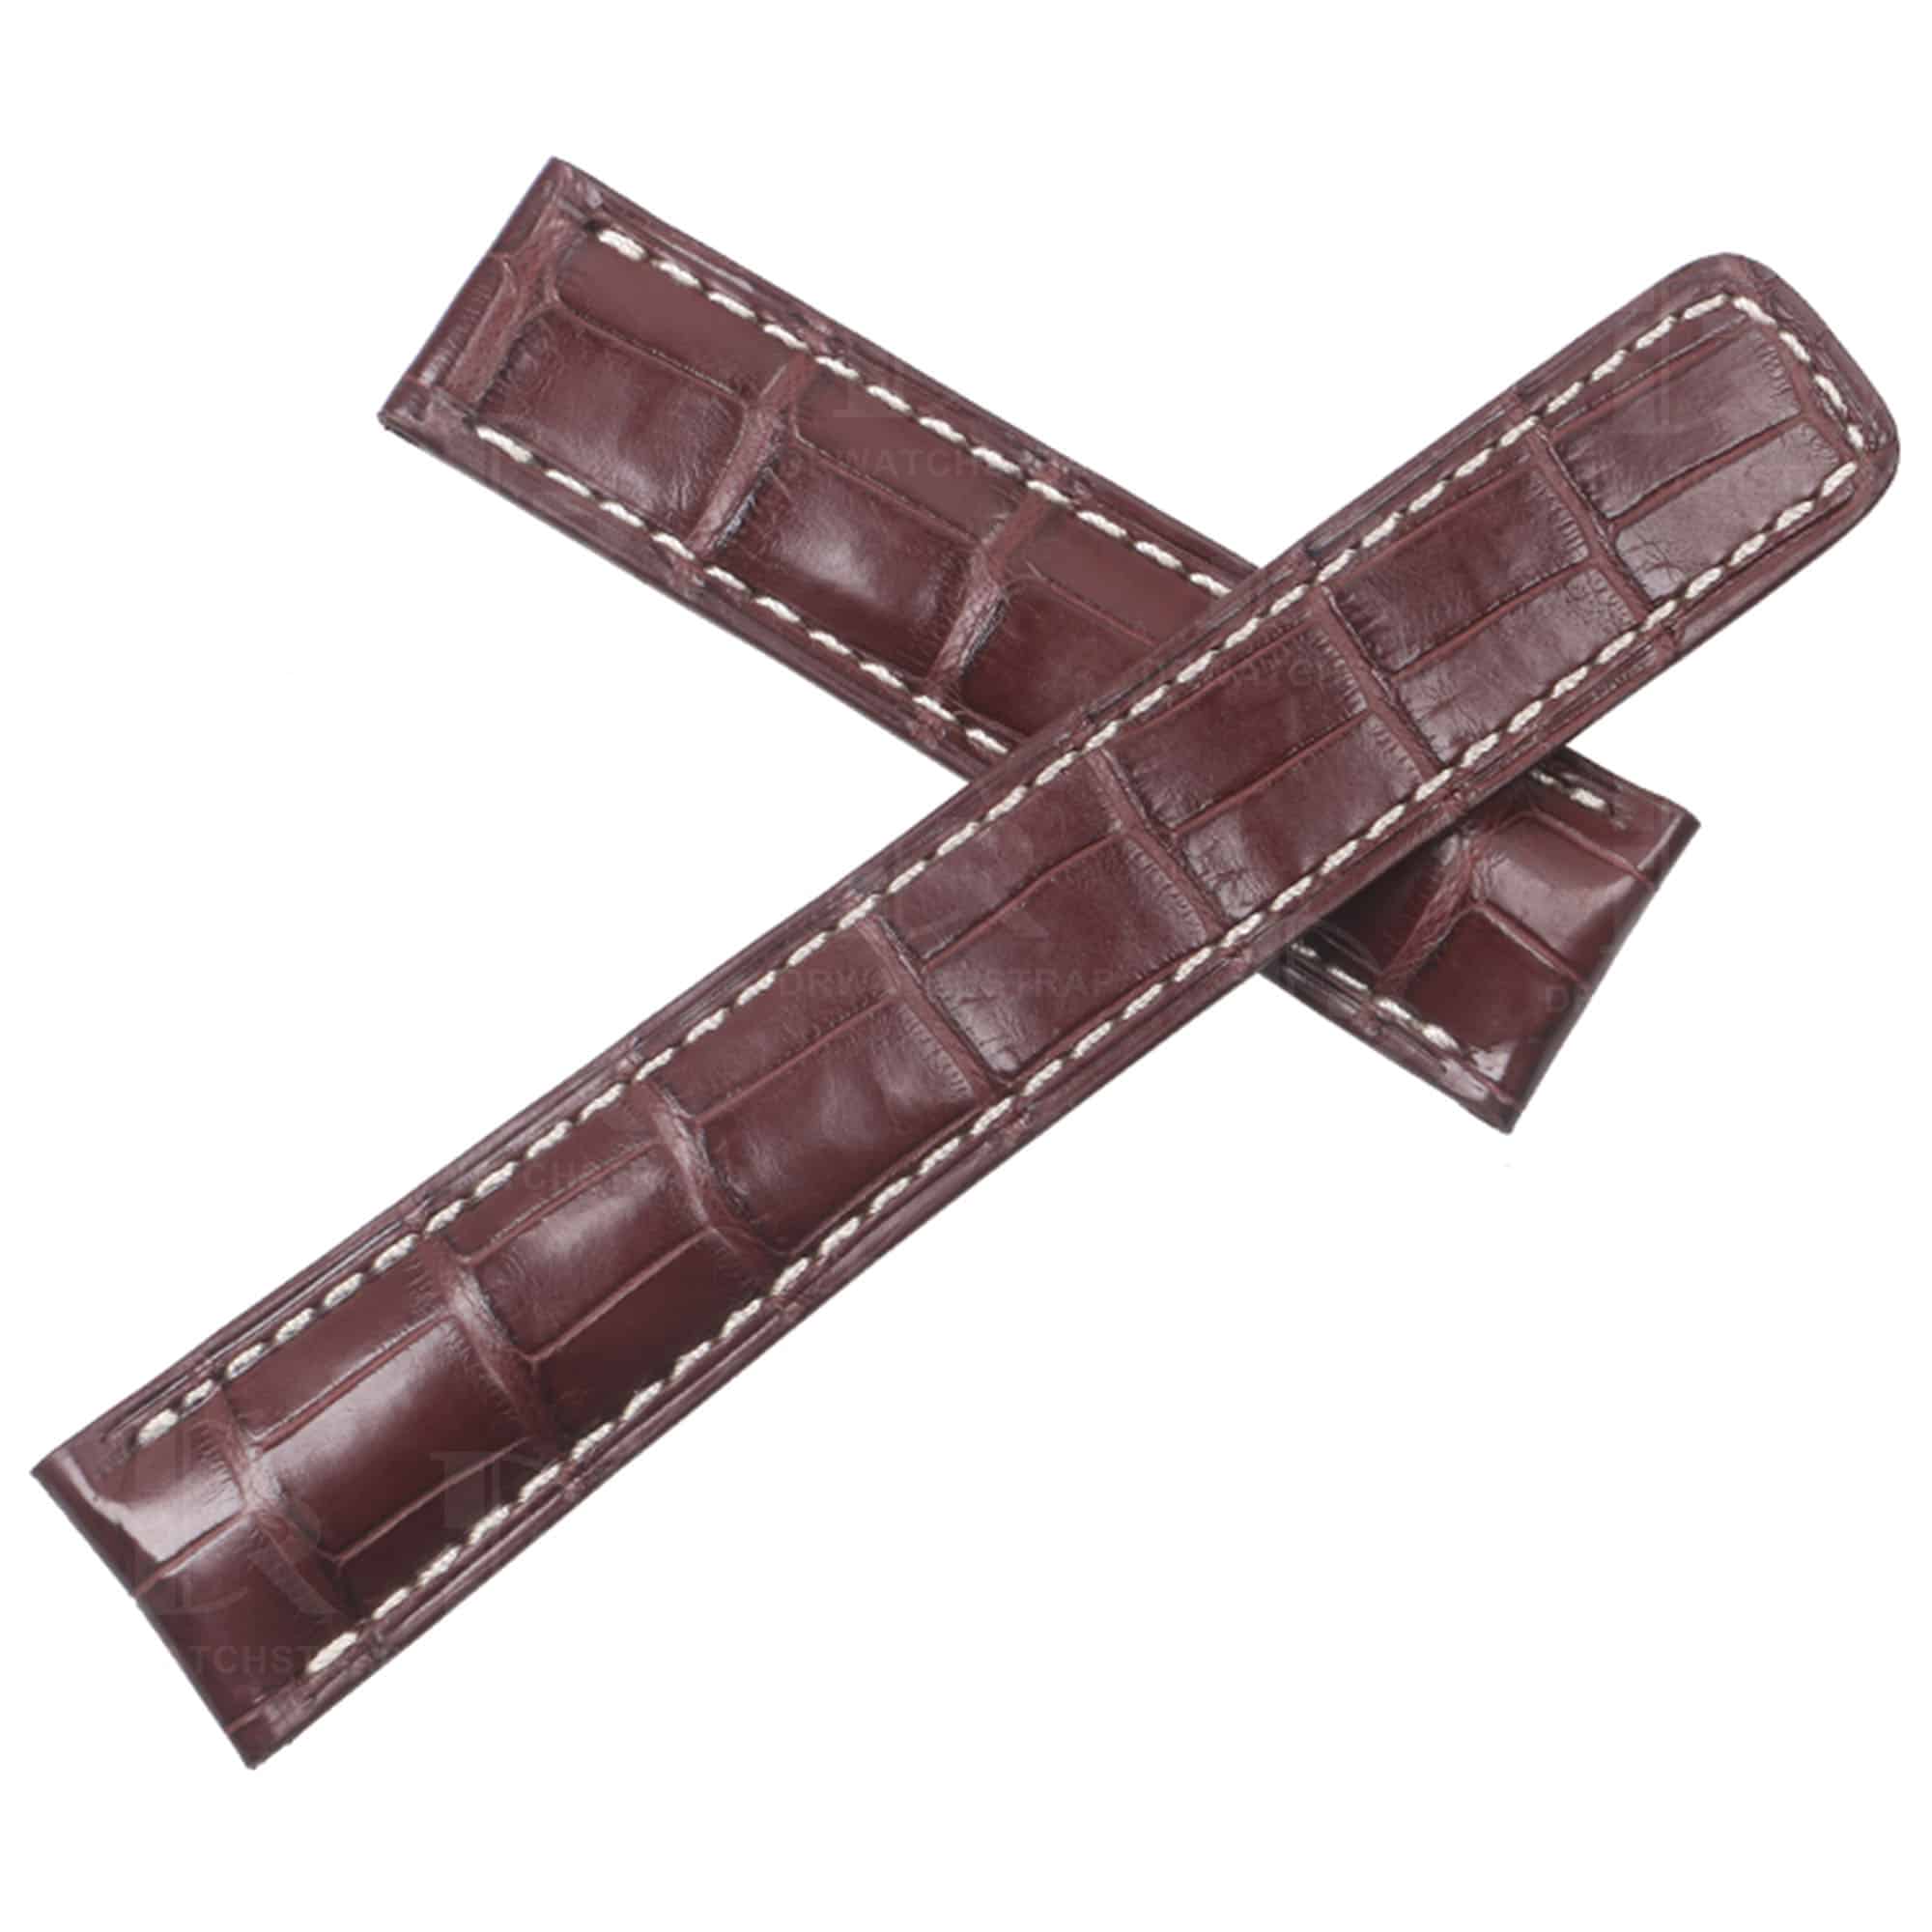 Custom handmade replacement leather alligator watch band for Carl f Bucherer straps